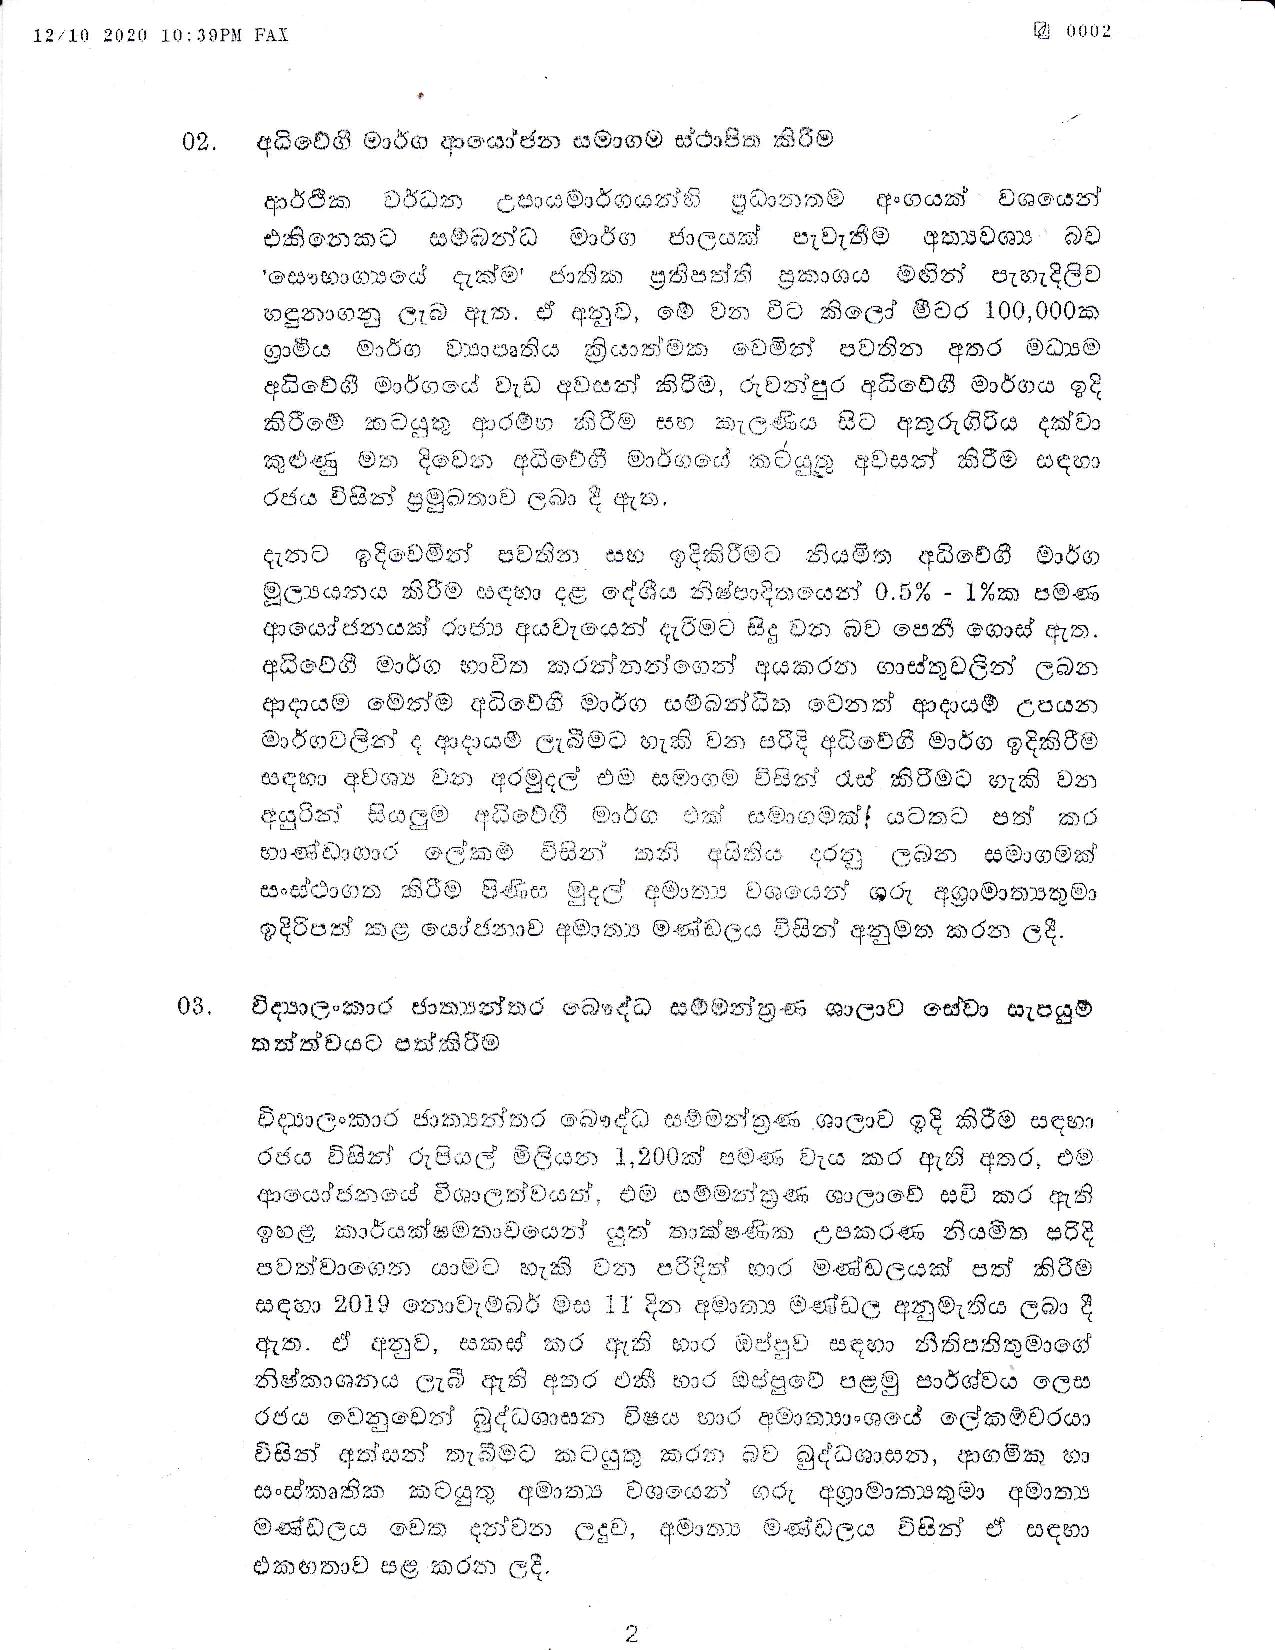 Cabinet Decision on 12.10.2020 page 002